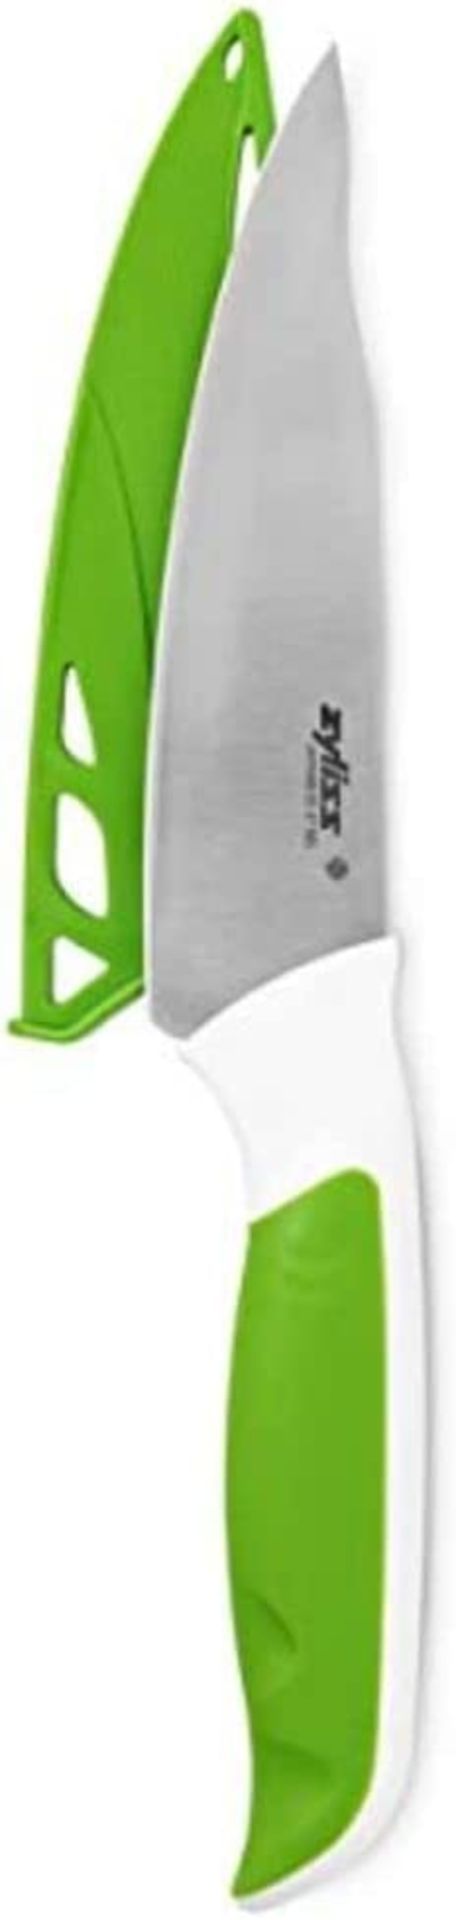 RRP £9.99 - New Zyliss 13cm Knife With Cover